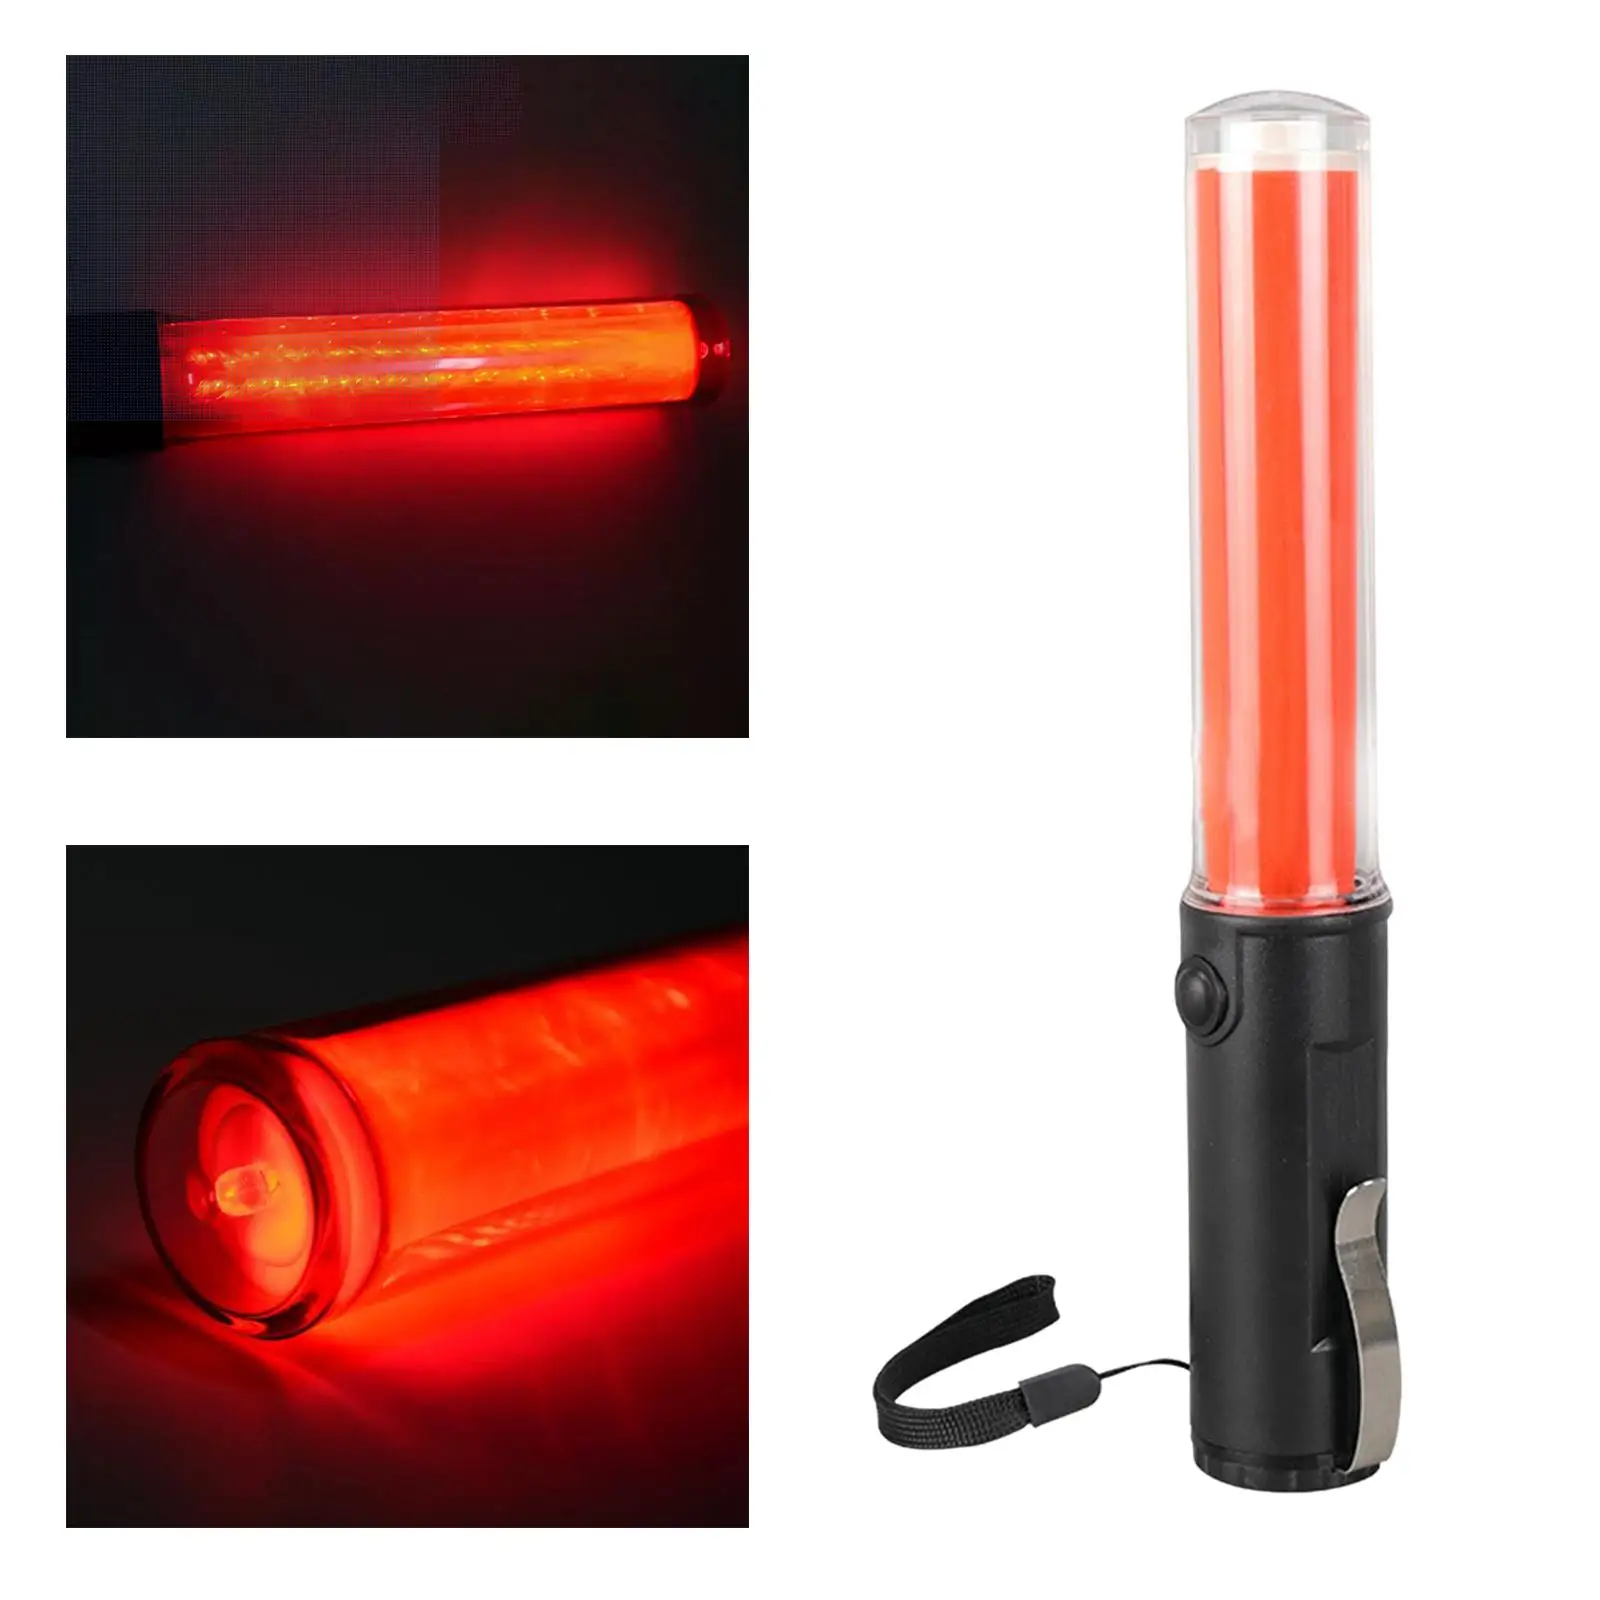 26cm Air Marshaling Signal Wand and Side Clip Design Signal Traffic Wand for Parking Guides LED Traffic Wand 3 Flashing Modes